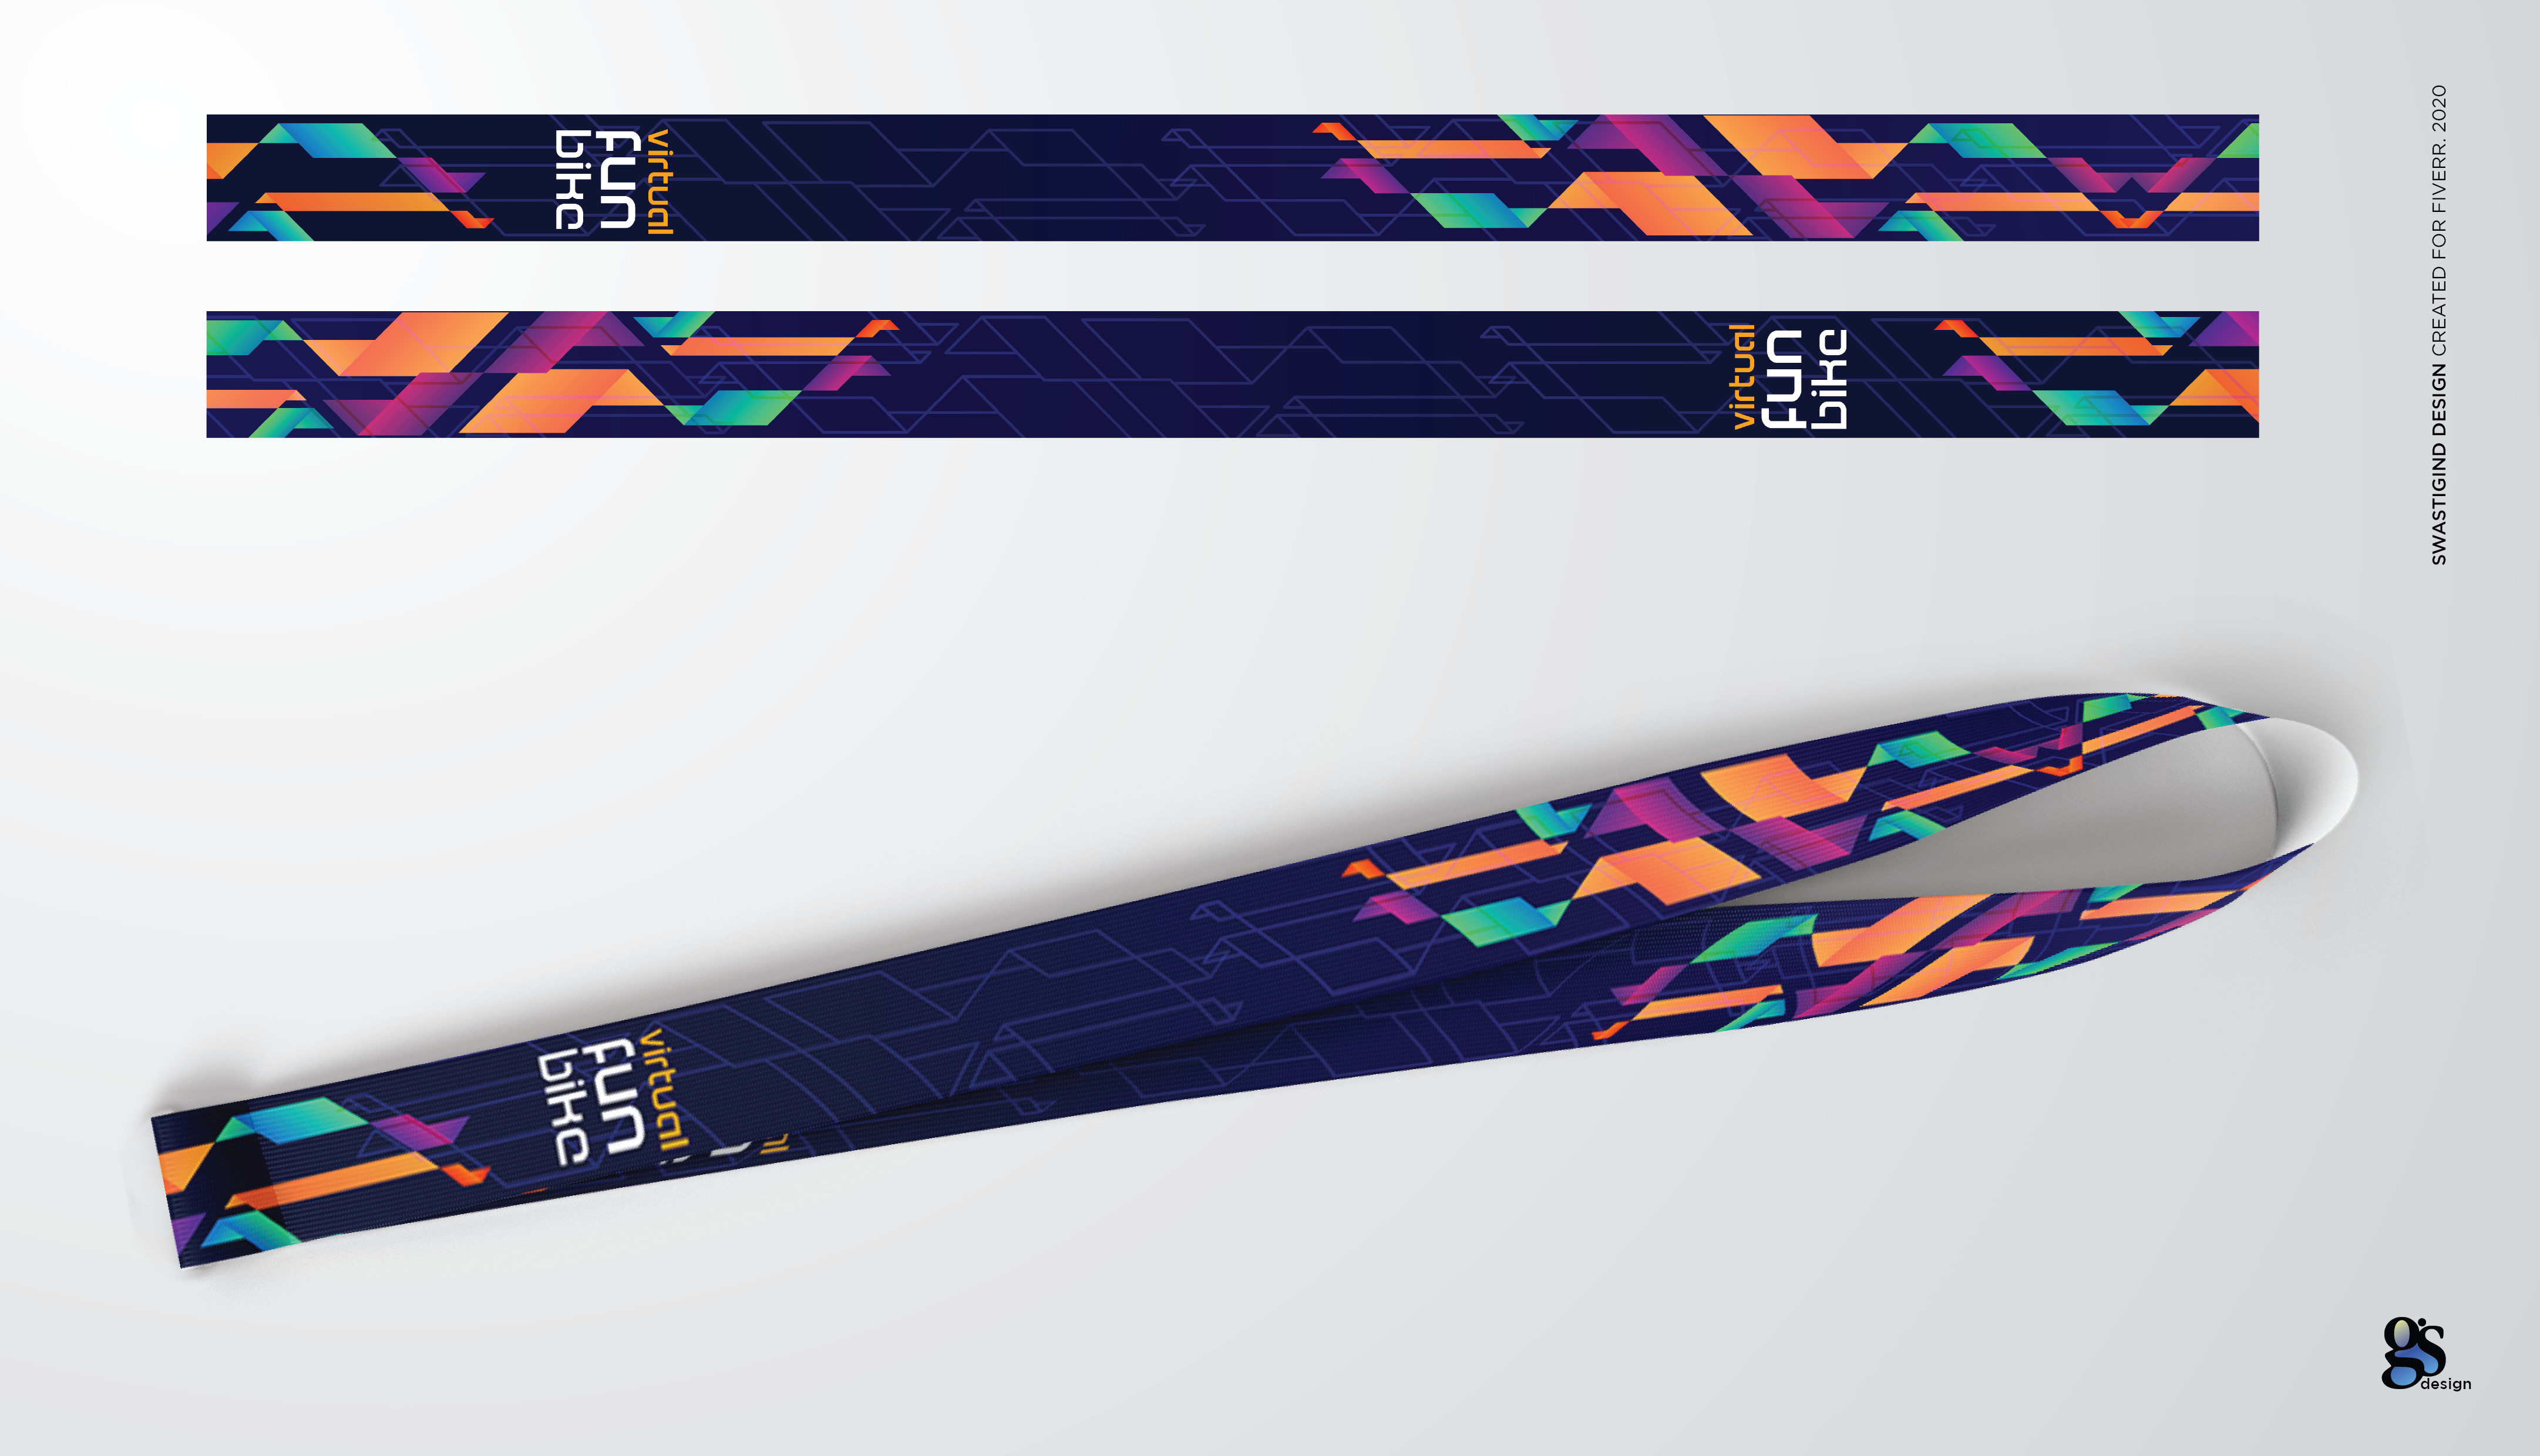 Design cool lanyard ribbon for your company or event by Swastigind | Fiverr